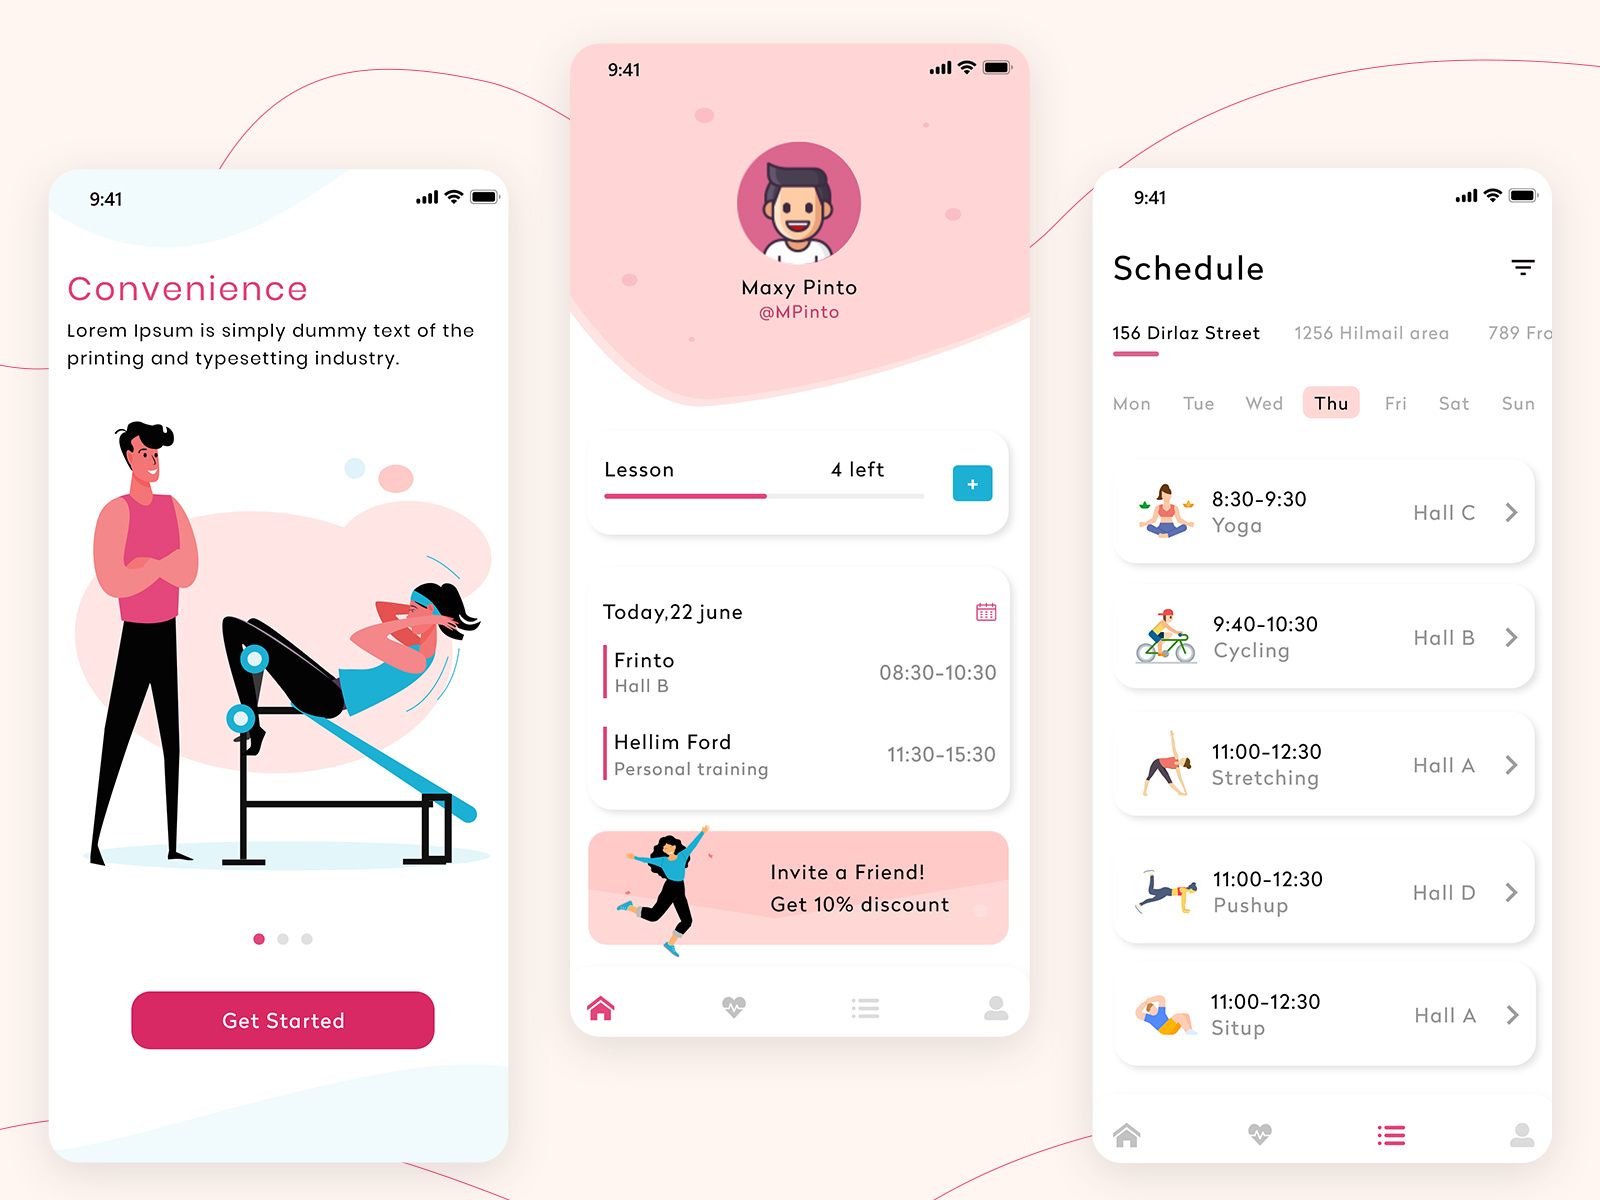 An example of how you can design a schedule in an app for fitness classes